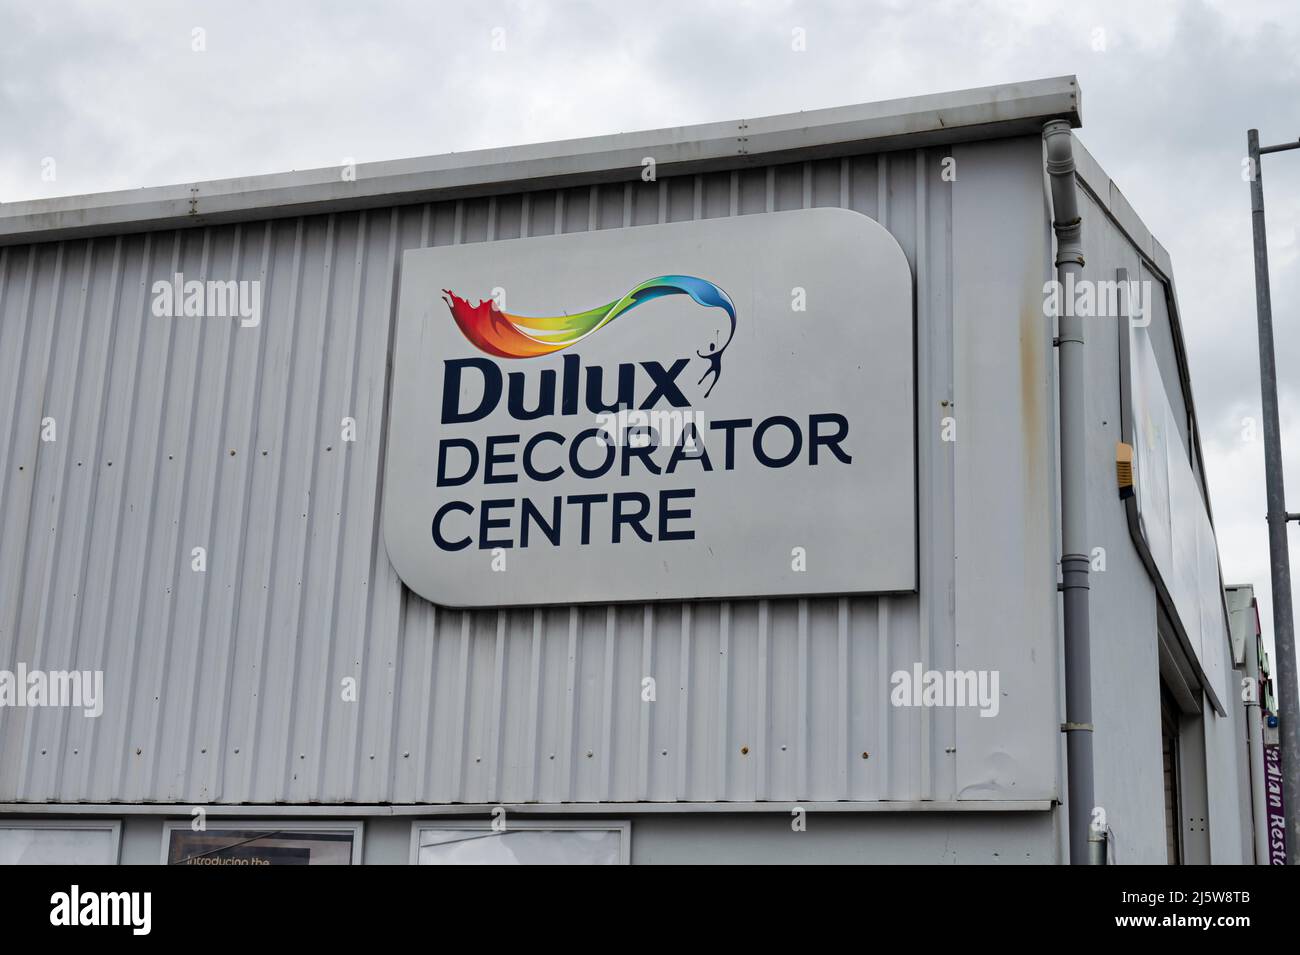 Derry, UK- April 13, 2022: Dulux Decorator Centre  in Derry, Northern Ireland Stock Photo